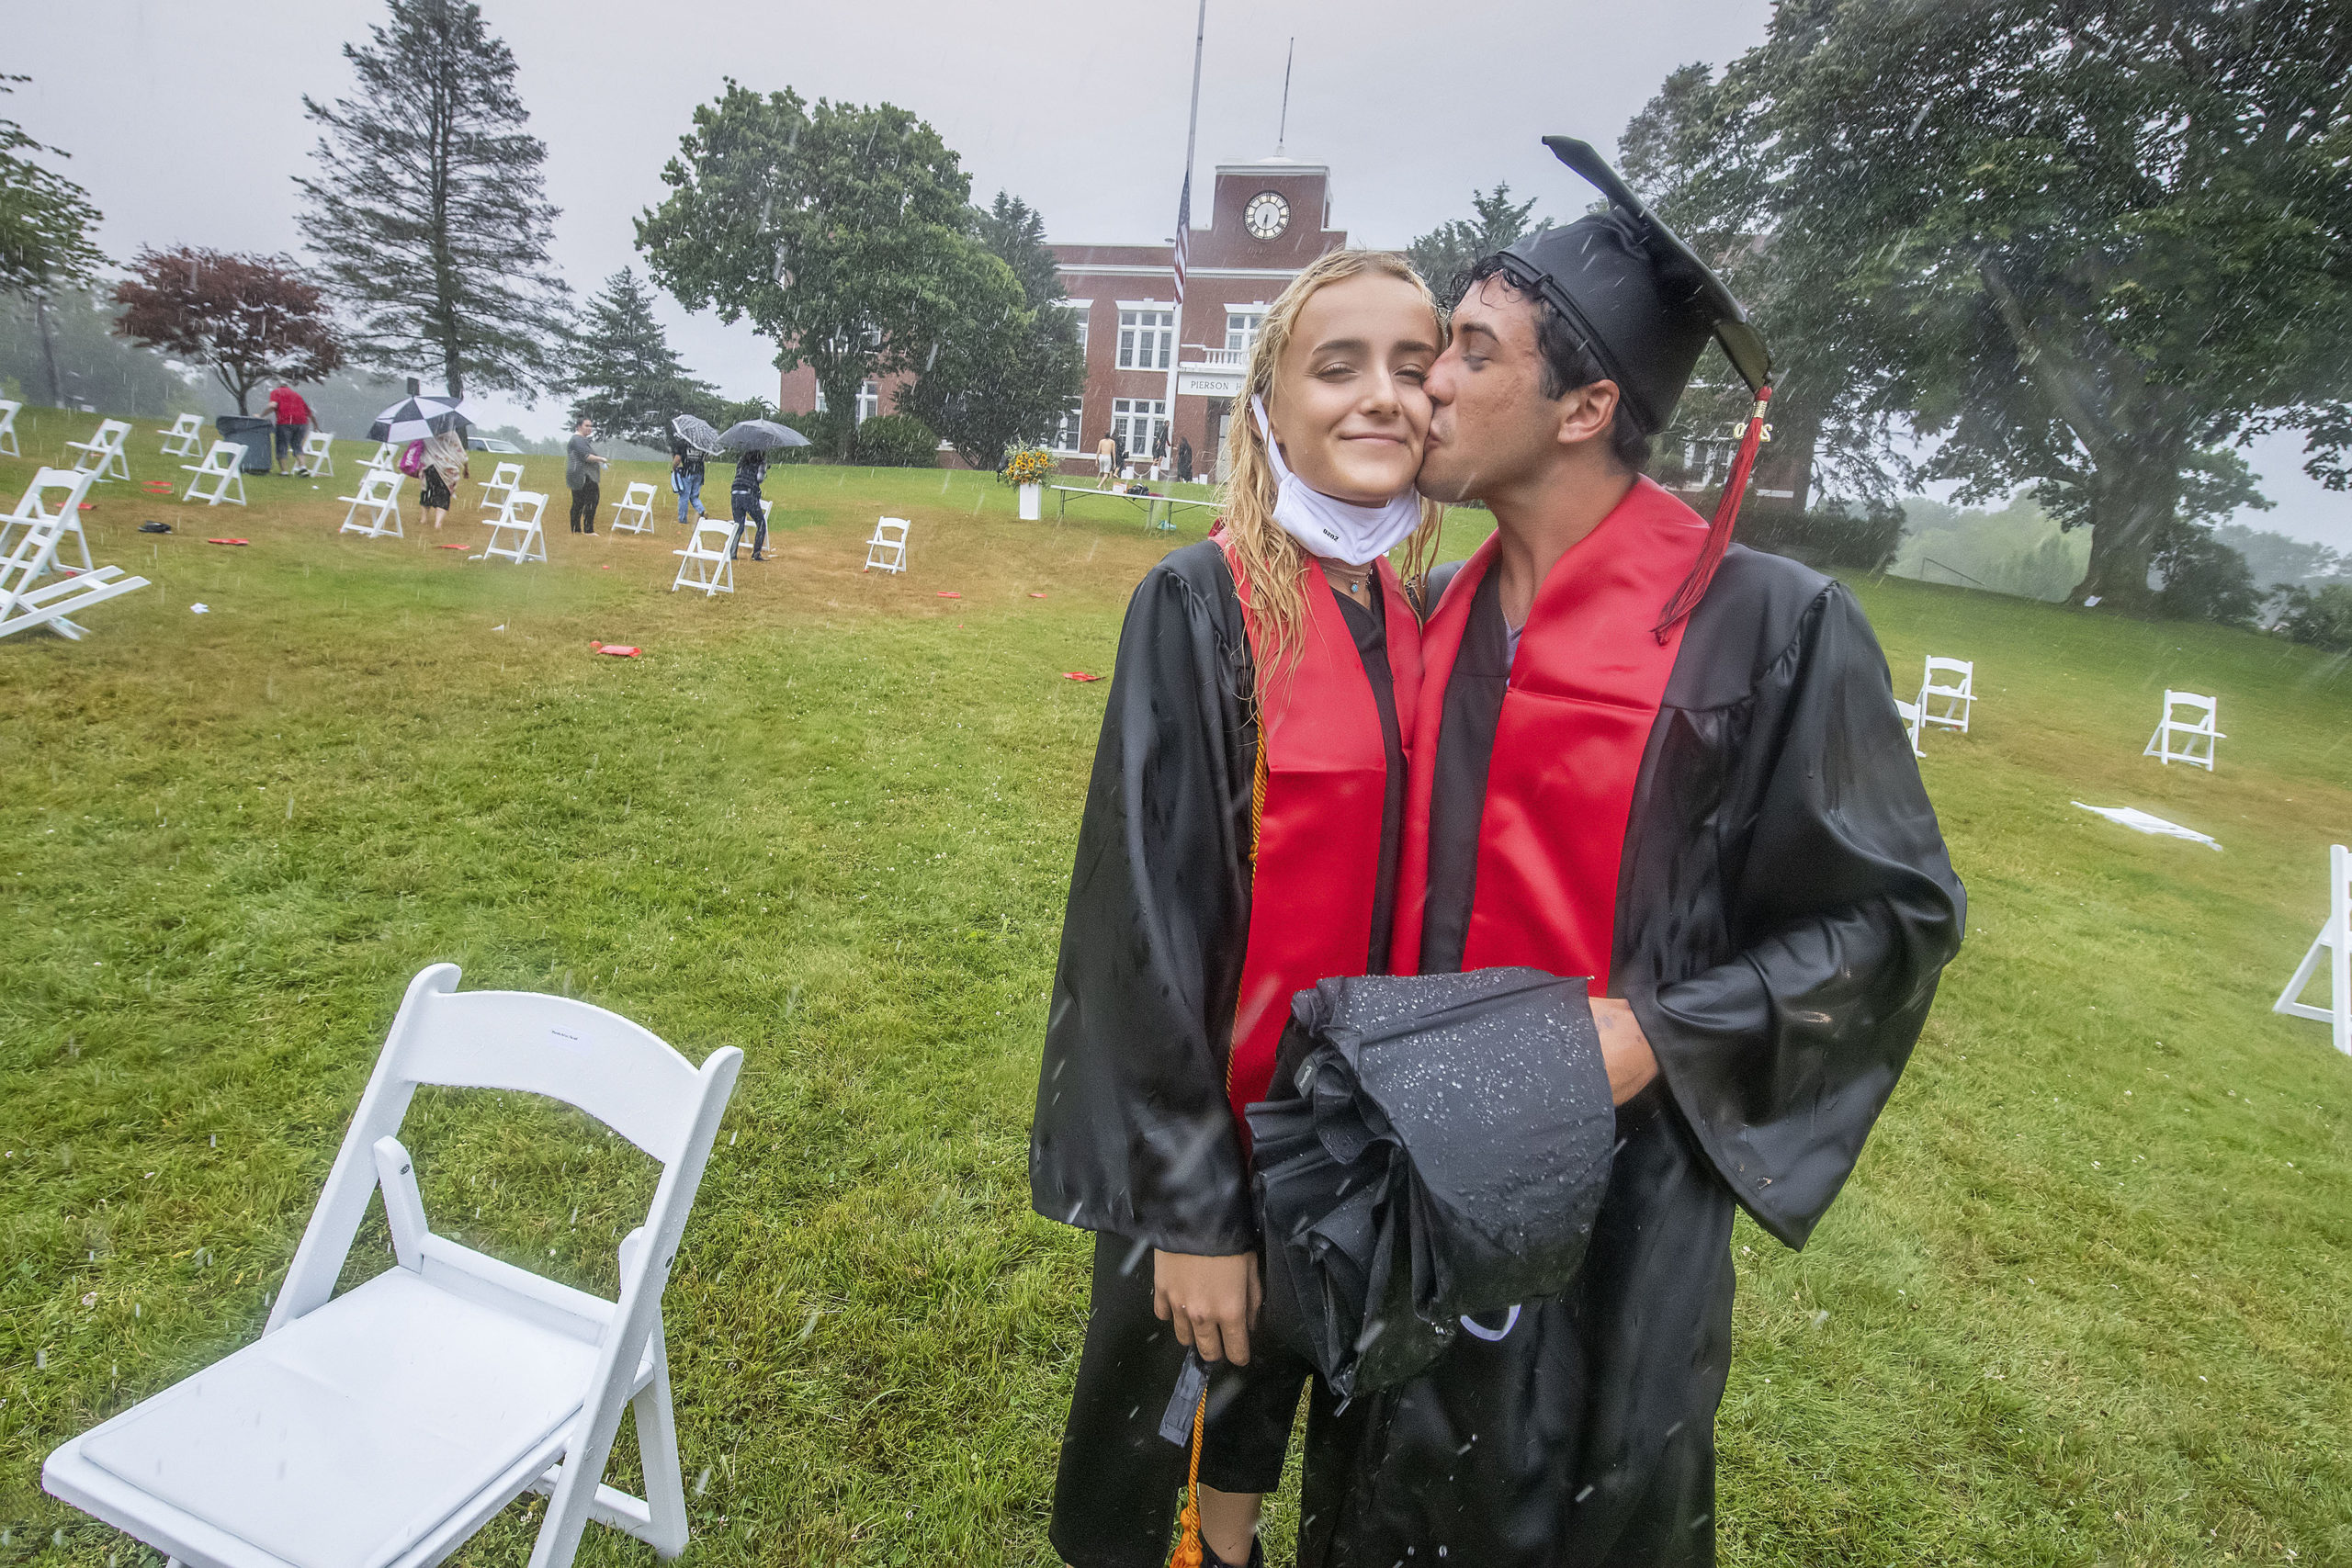 Ellie Borzilleri gets a kiss from classmate Patrick Chisholm following the Pierson High School 2020 Commencement Ceremony at Pierson High School on Saturday.